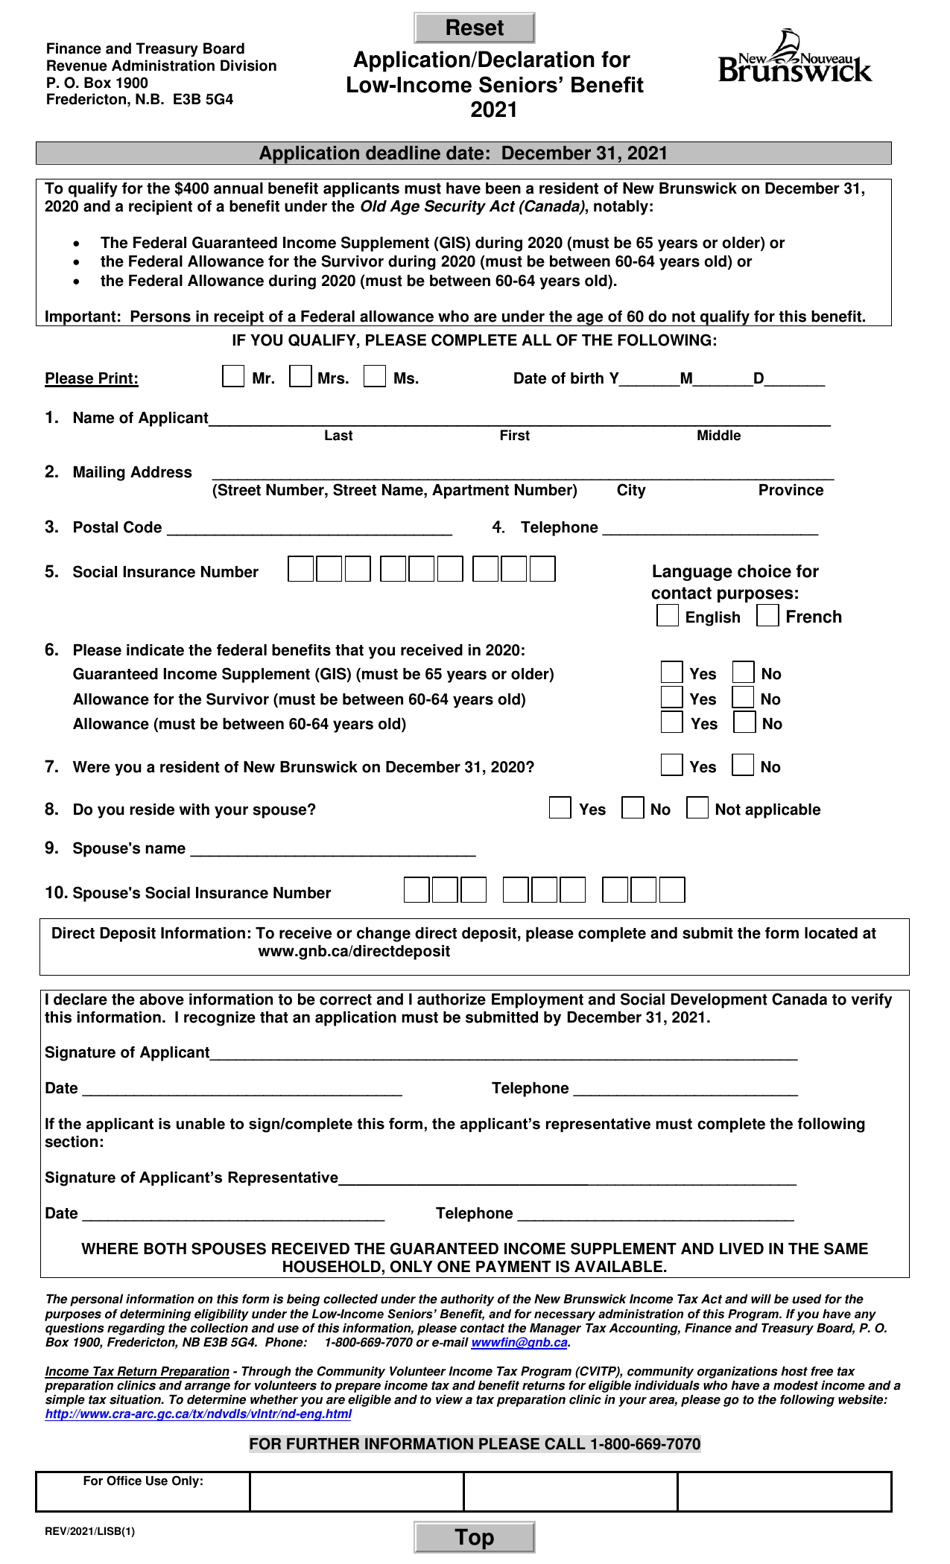 Application / Declaration for Low-Income Seniors Benefit - New Brunswick, Canada, Page 1